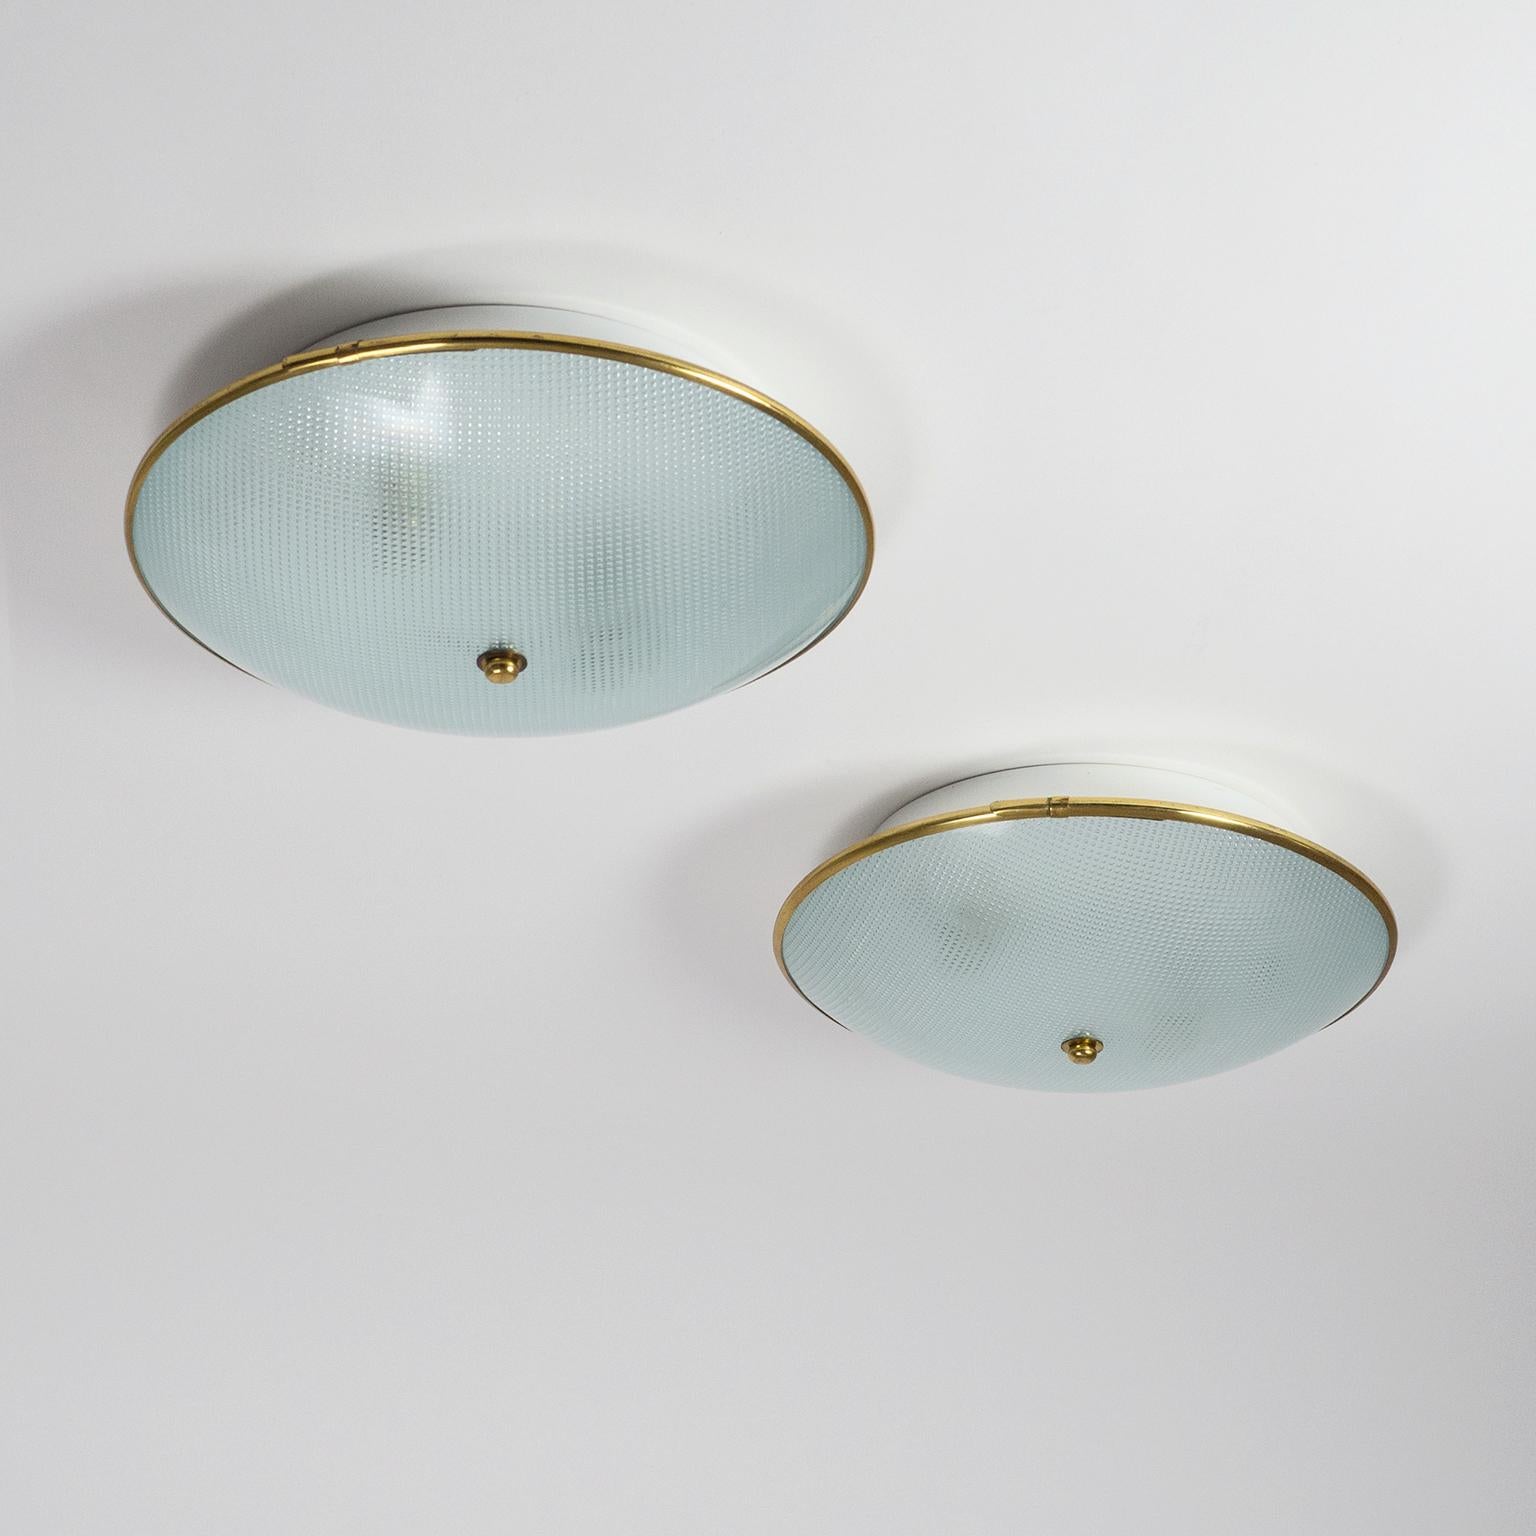 Modernist pair of Italian textured glass flush mount or wall lights from the 1950s. A white lacquered aluminum backplate houses two original brass and ceramic E14 sockets with new wiring. The glass diffuser has a geometric texture on the inside and